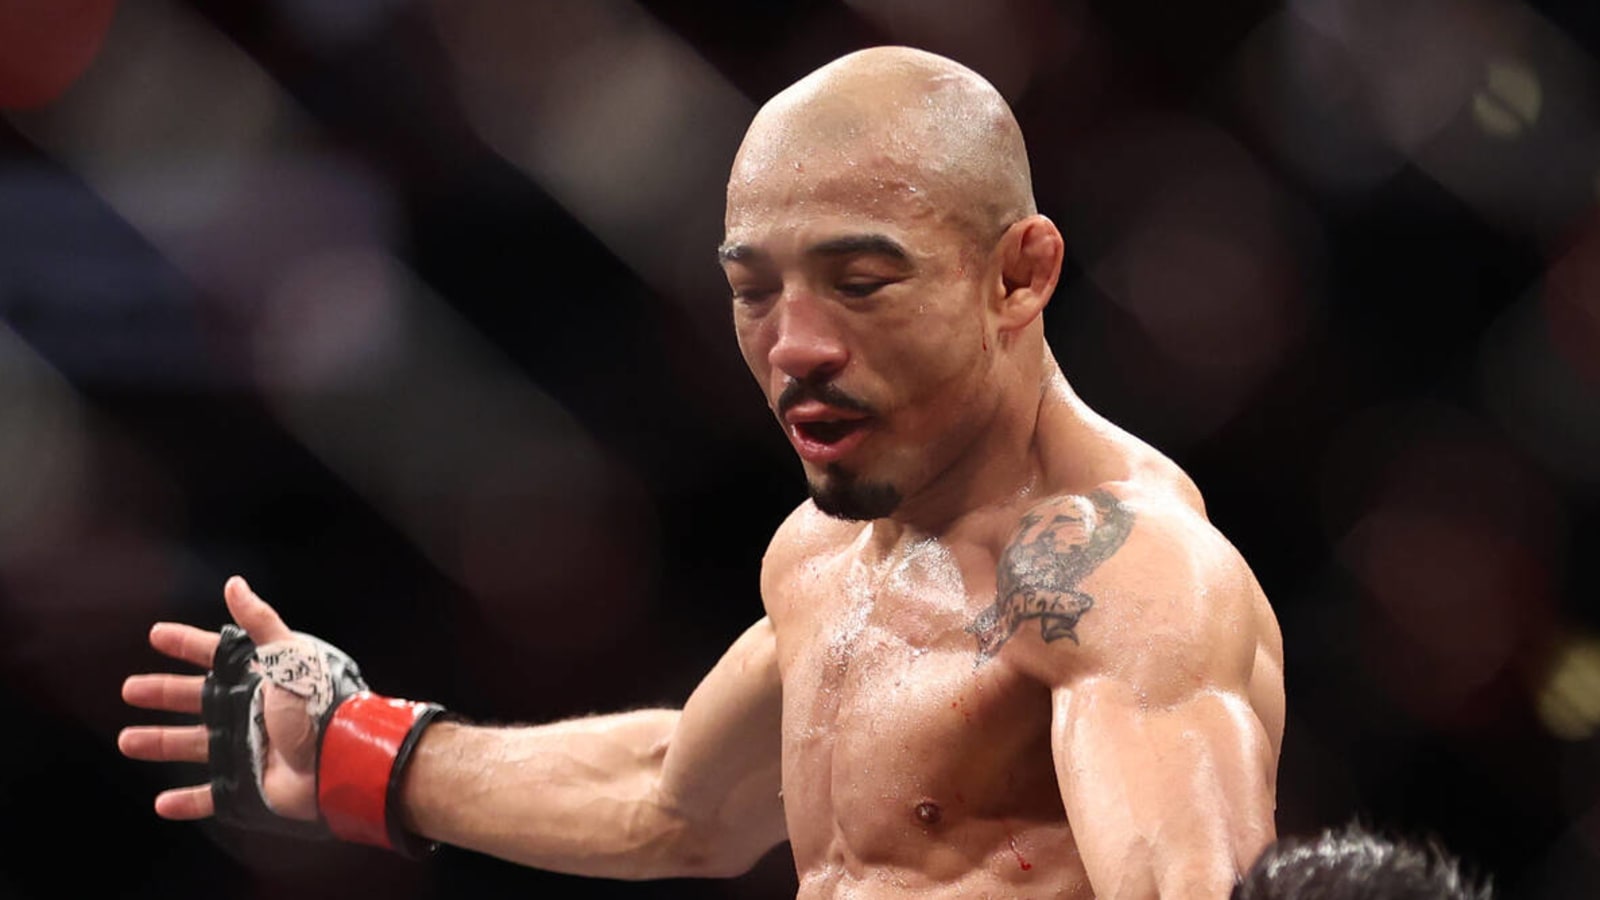 Jose Aldo discusses plans to capture bantamweight gold as retirement nears